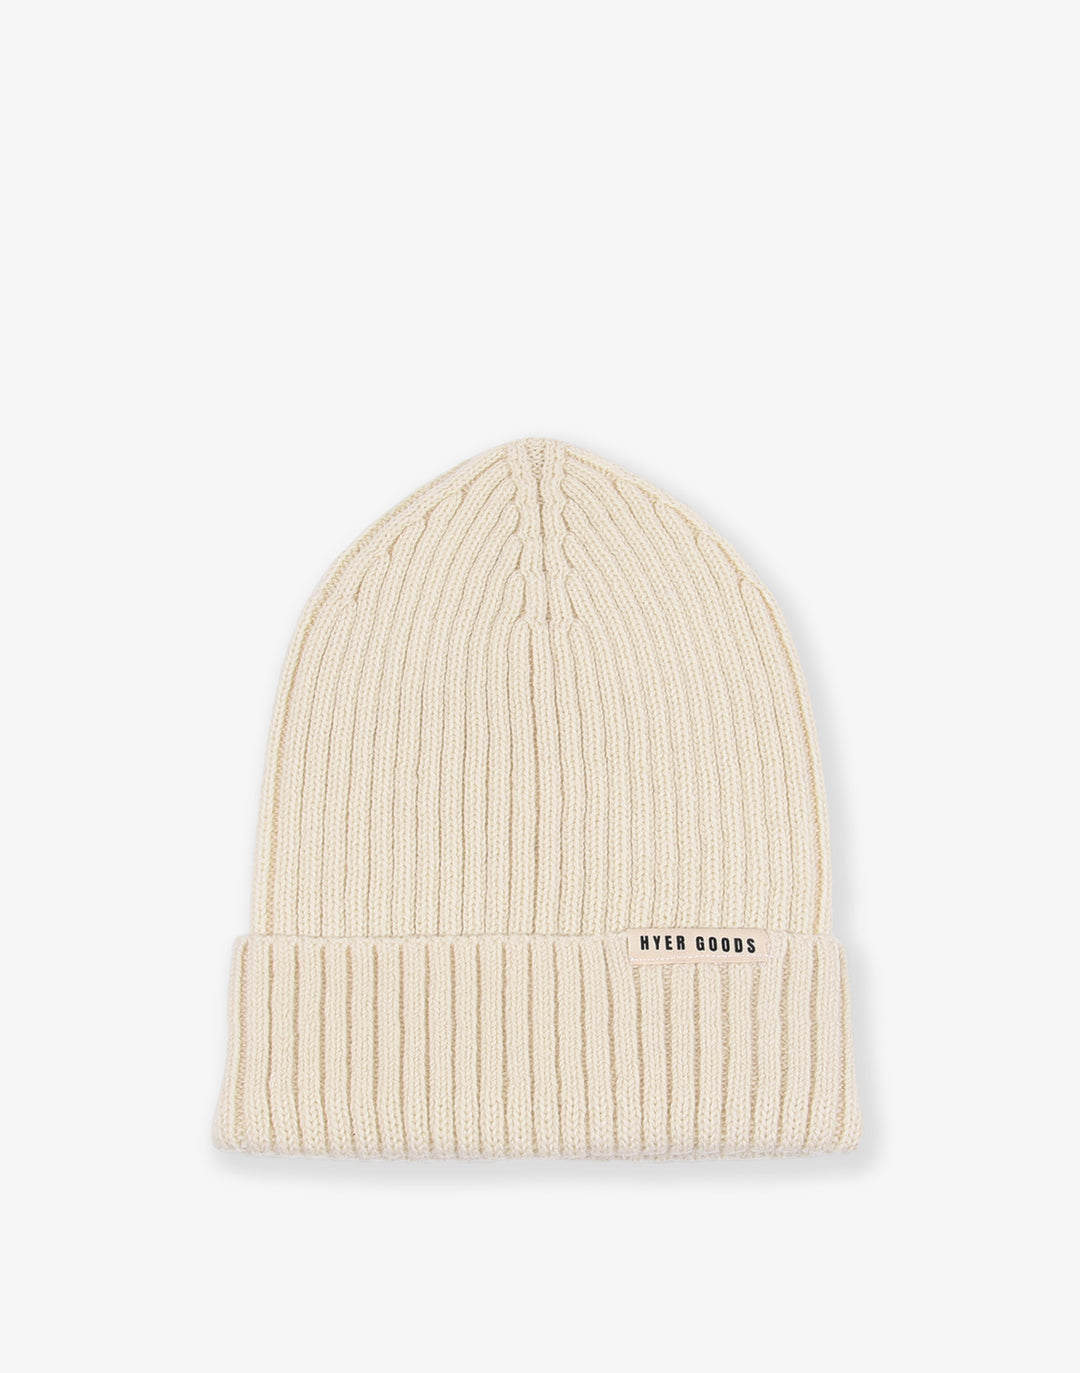 Hyer Goods_A Better Beanie_off-white_cream_#color_off-white